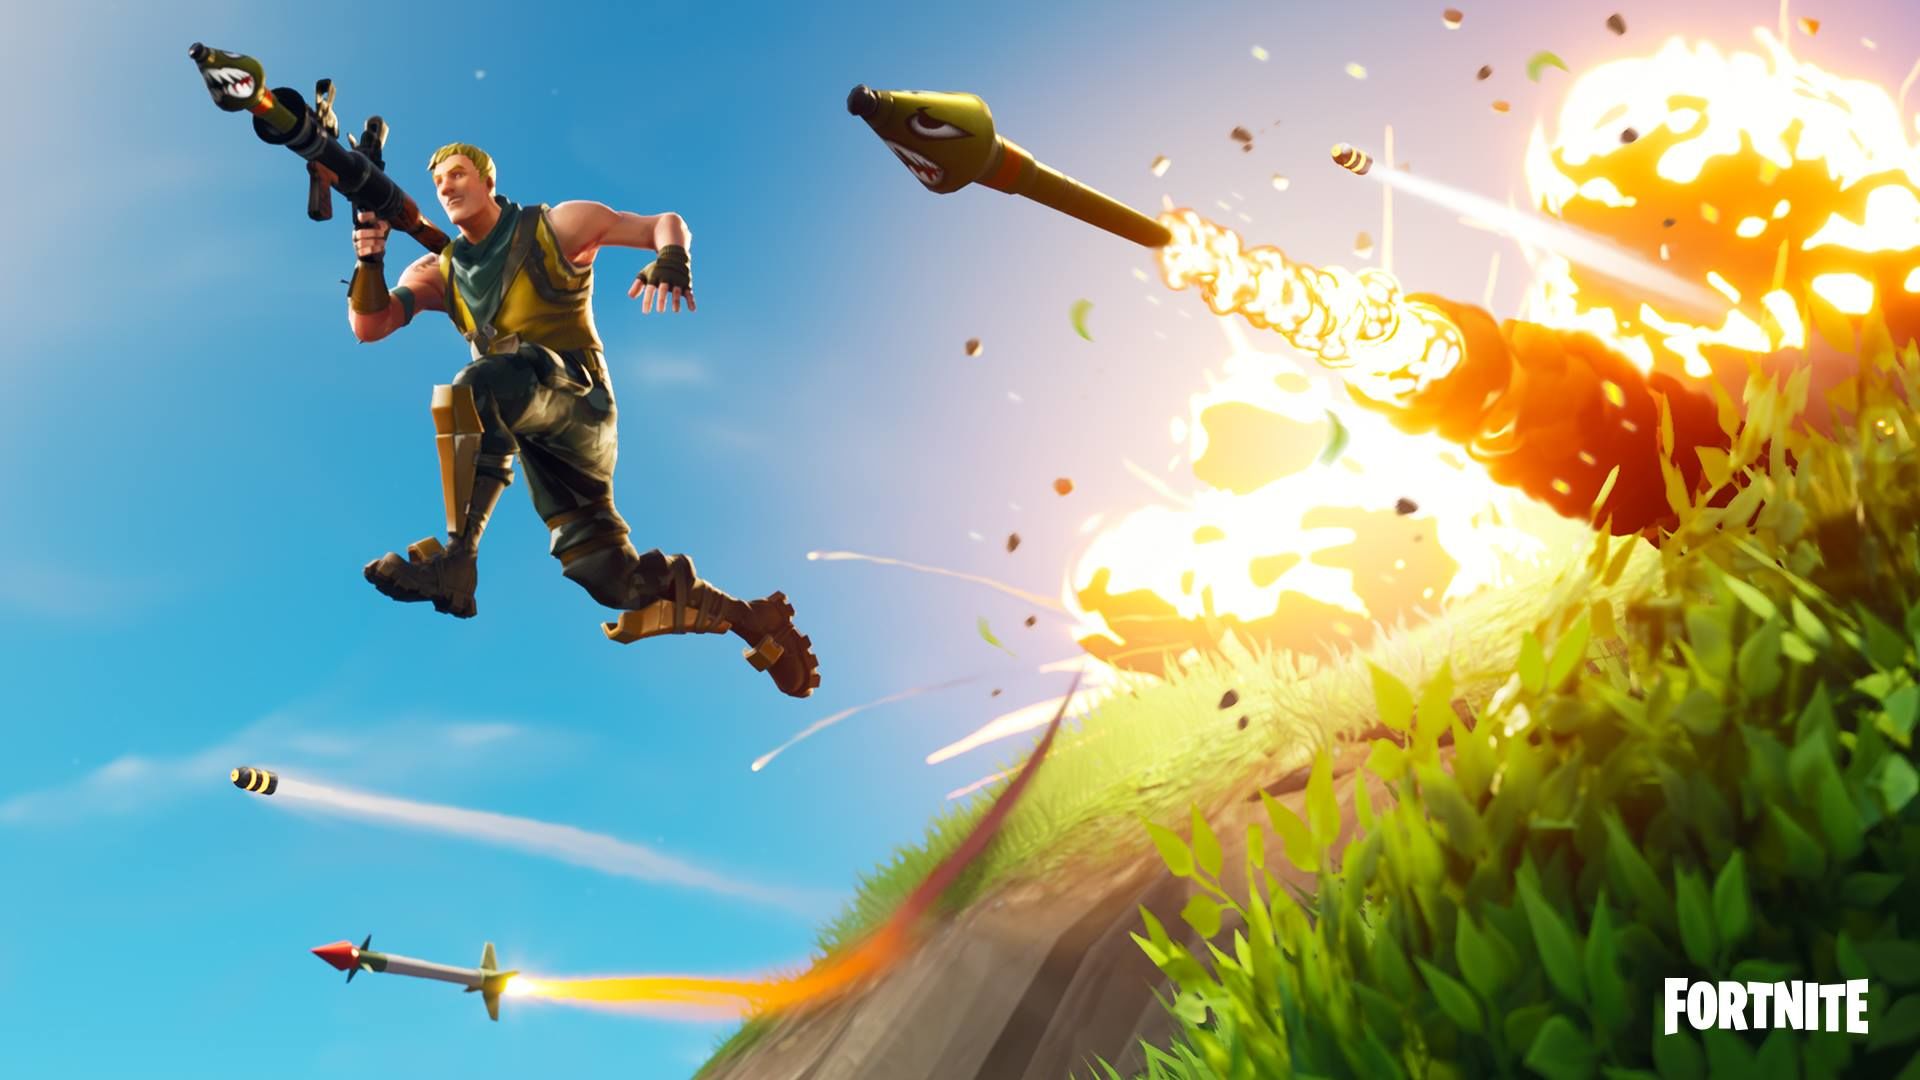 gaming fresh prince star sues fortnite close to the sun drops trailer warhammer 40k animated series gaming fresh prince star sues fortnite - fortnite fire king fan art